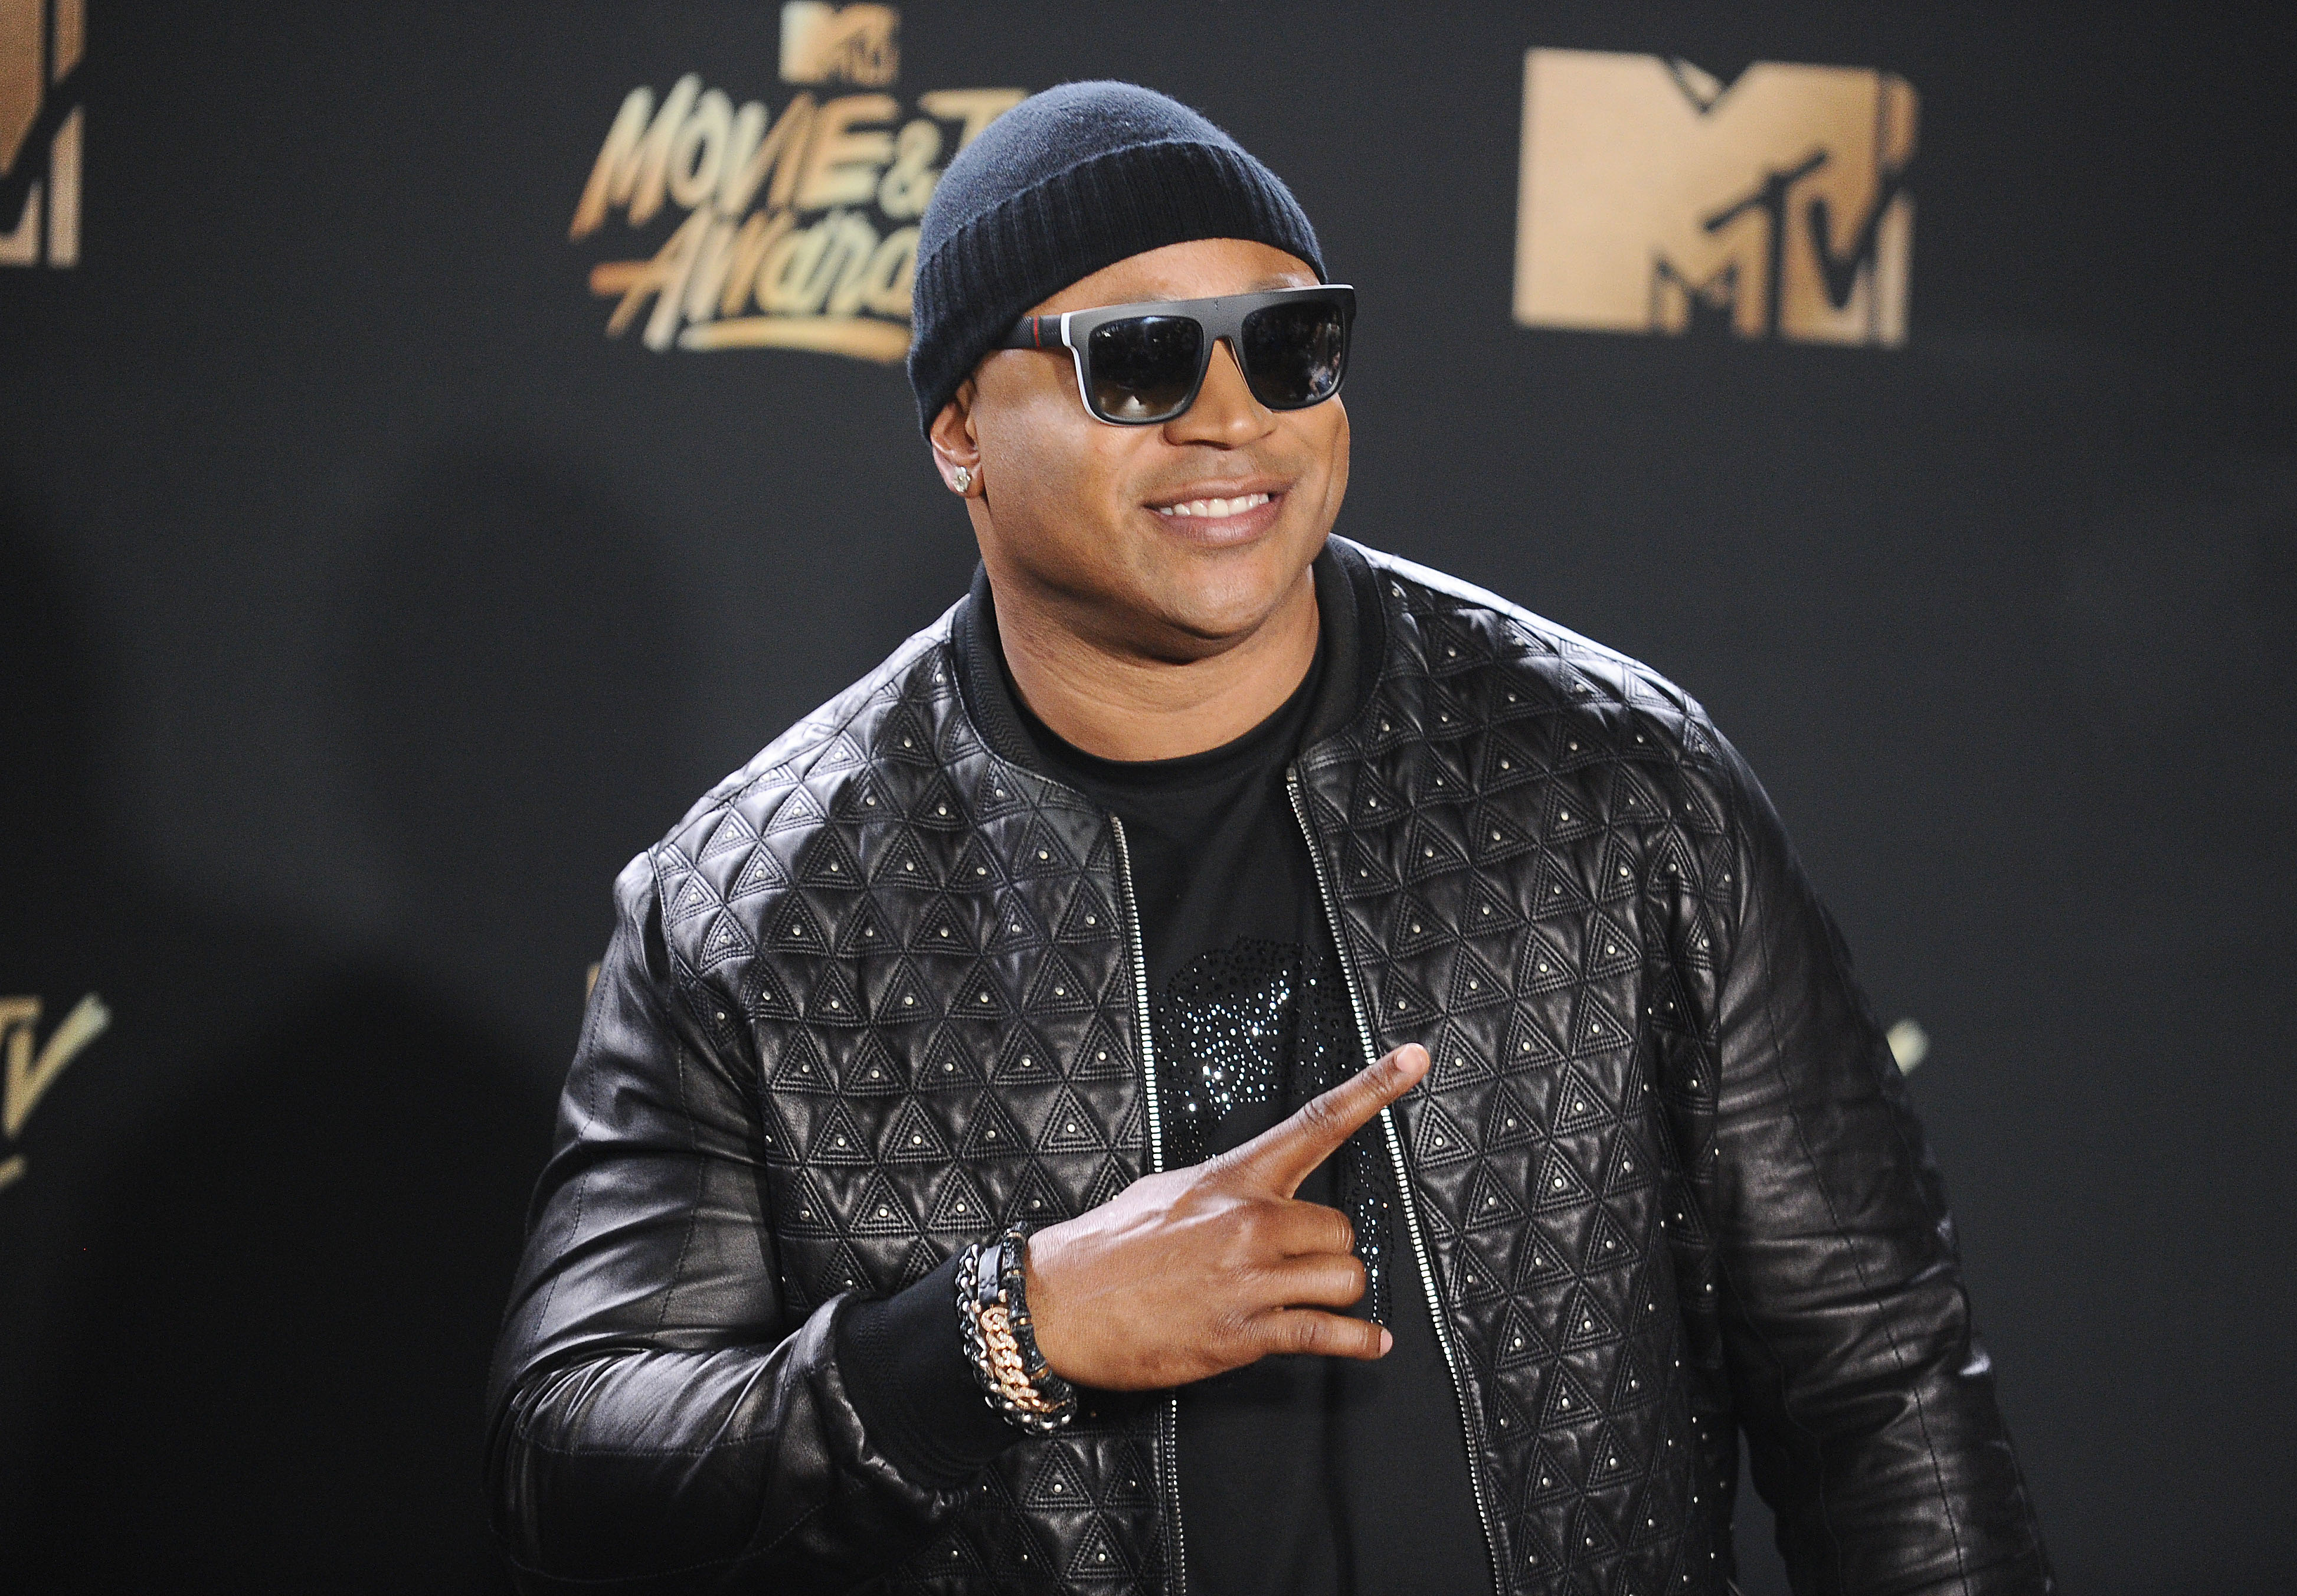  LL Cool J at the 2017 MTV Movie and TV Awards at The Shrine Auditorium on May 7, 2017 in Los Angeles, California.| Source: Getty Images